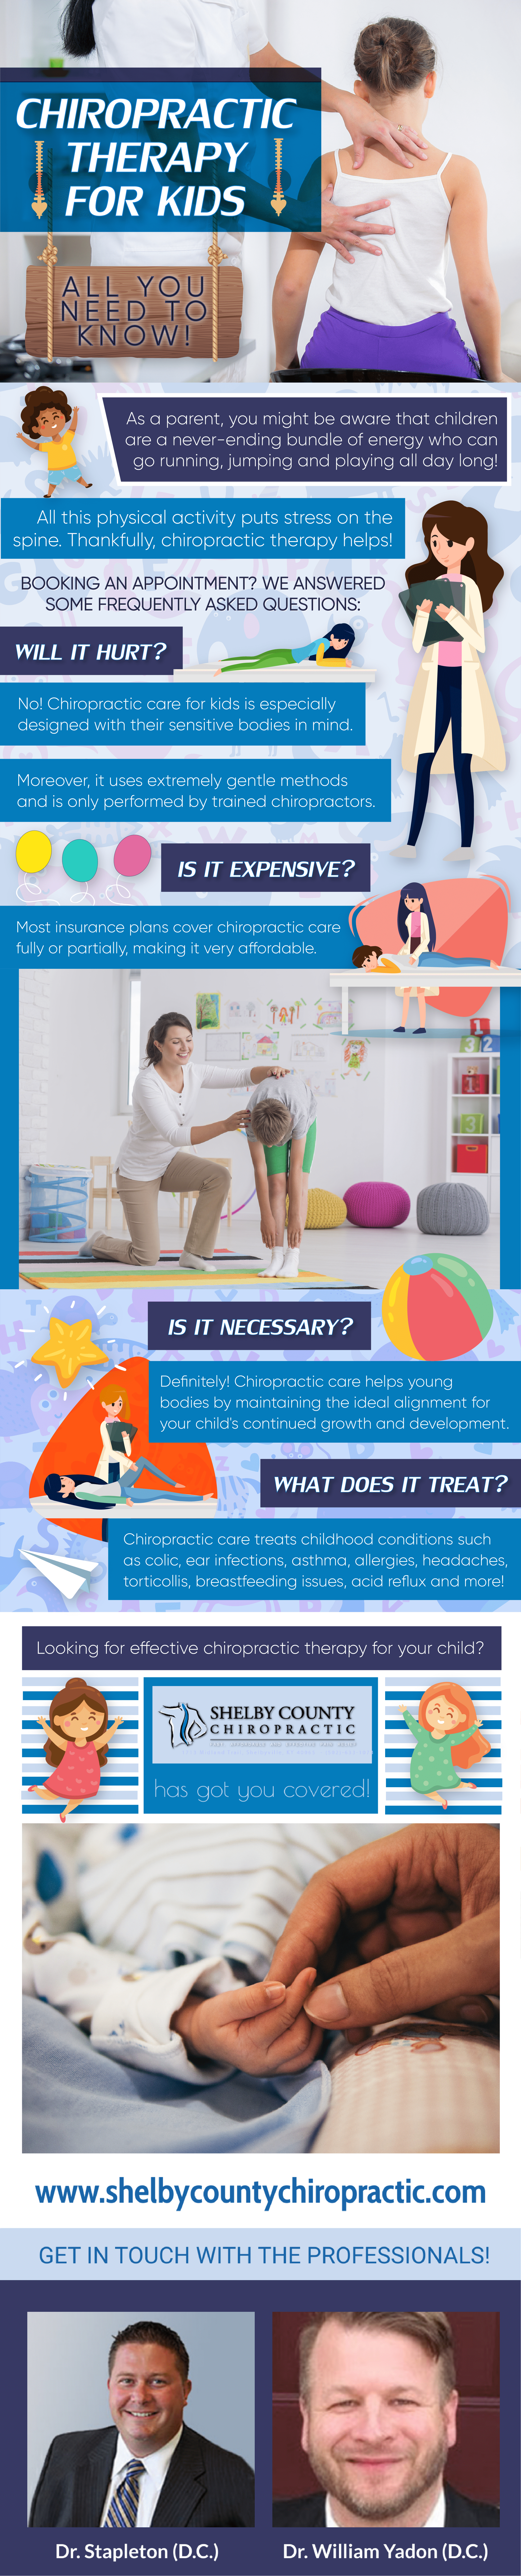 Chiropractic-For-Kids